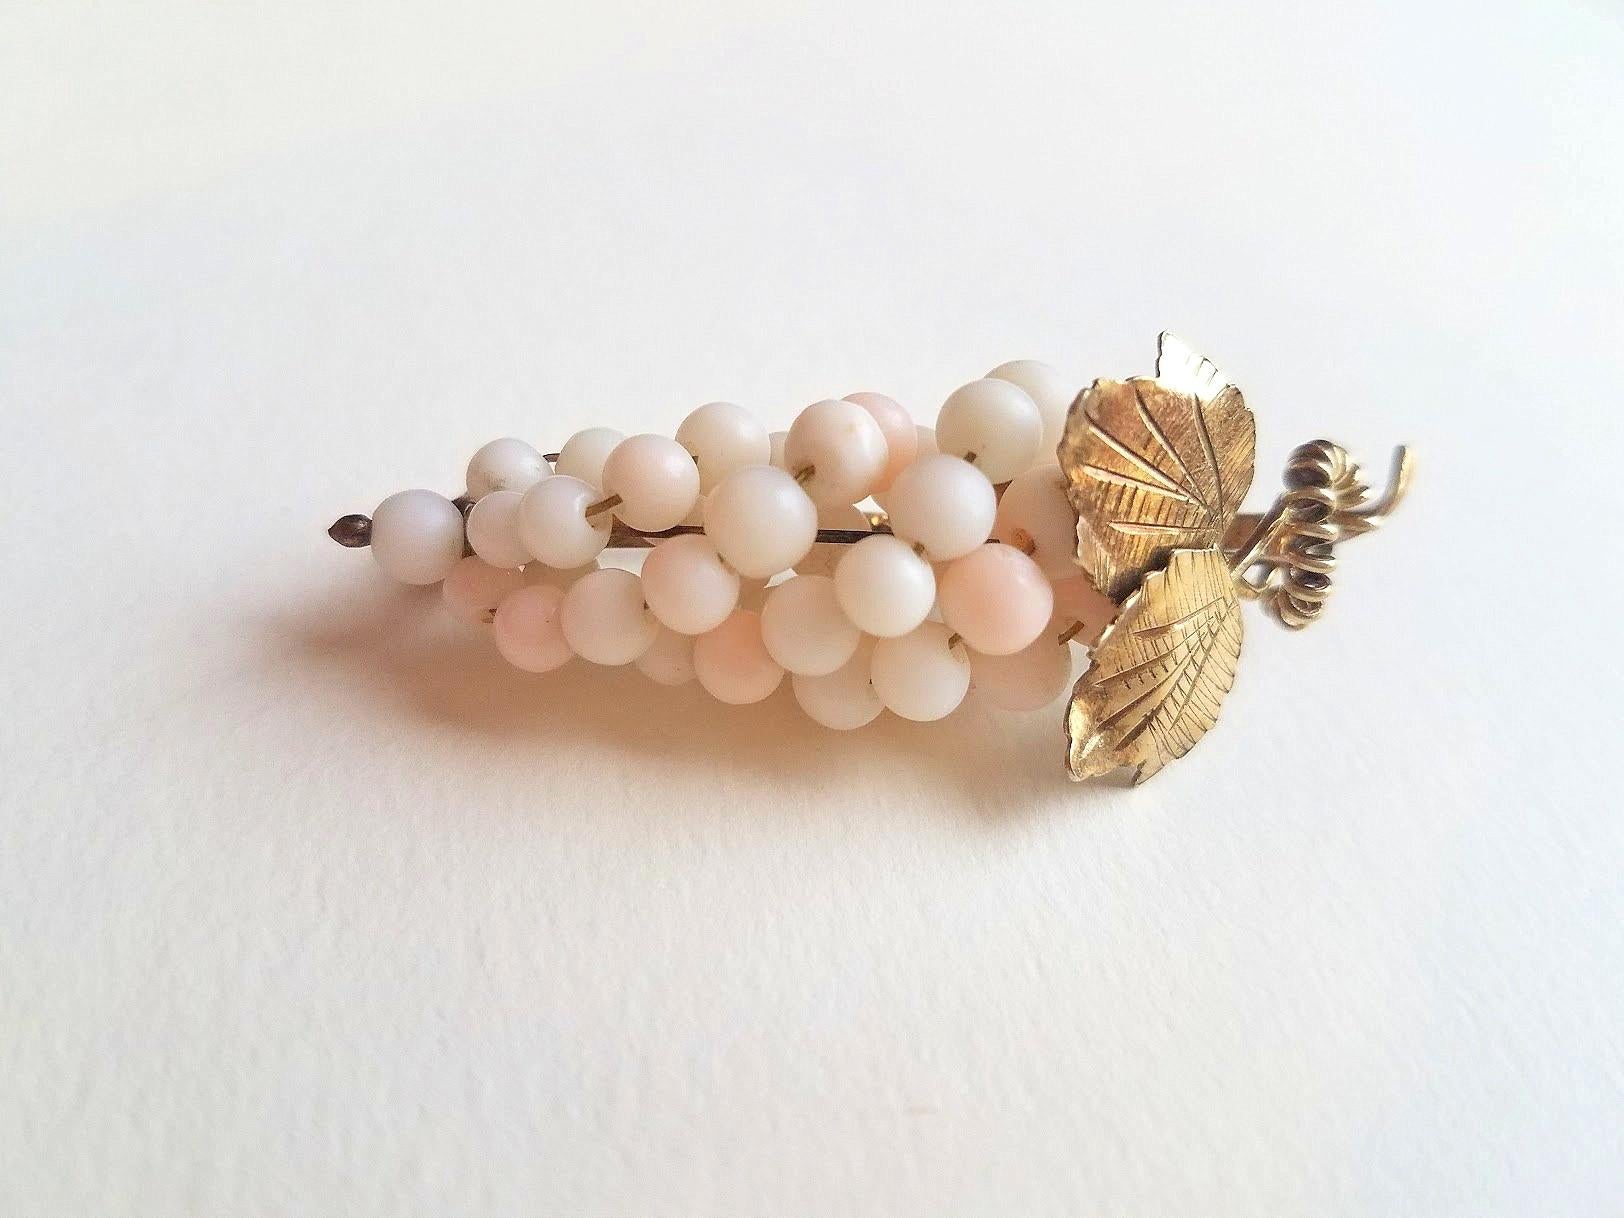 Introducing our exquisite Angel Skin Coral Grapes Brooch that is sure to add a touch of elegance to your collection.

Measuring at 2 inches (5 cm) tall with a leaf span of just under 7/8